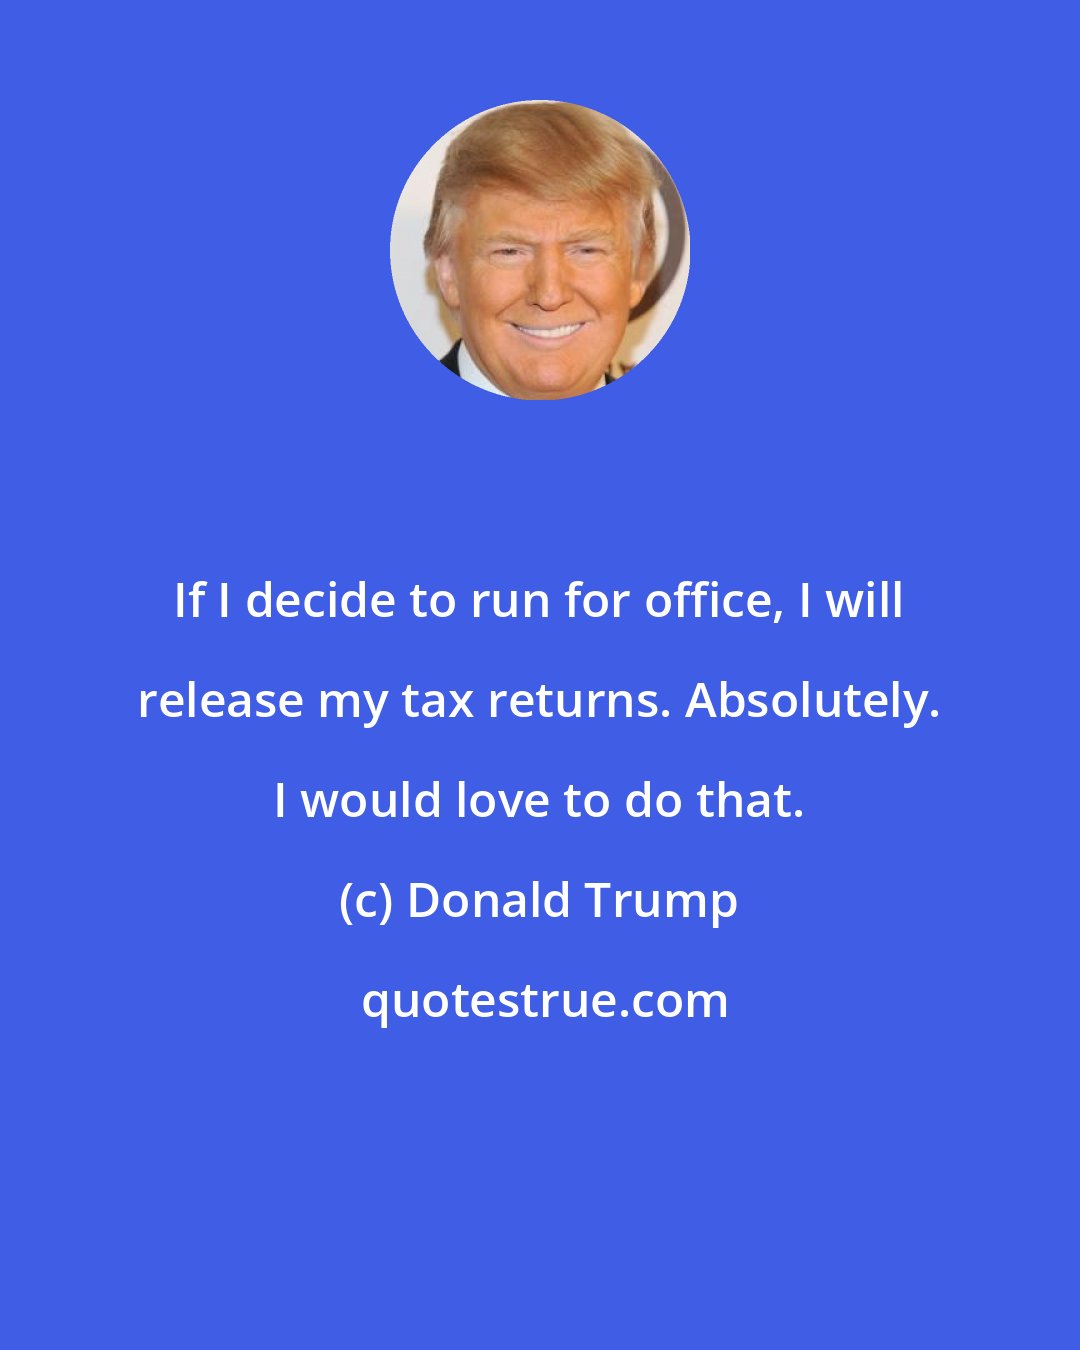 Donald Trump: If I decide to run for office, I will release my tax returns. Absolutely. I would love to do that.